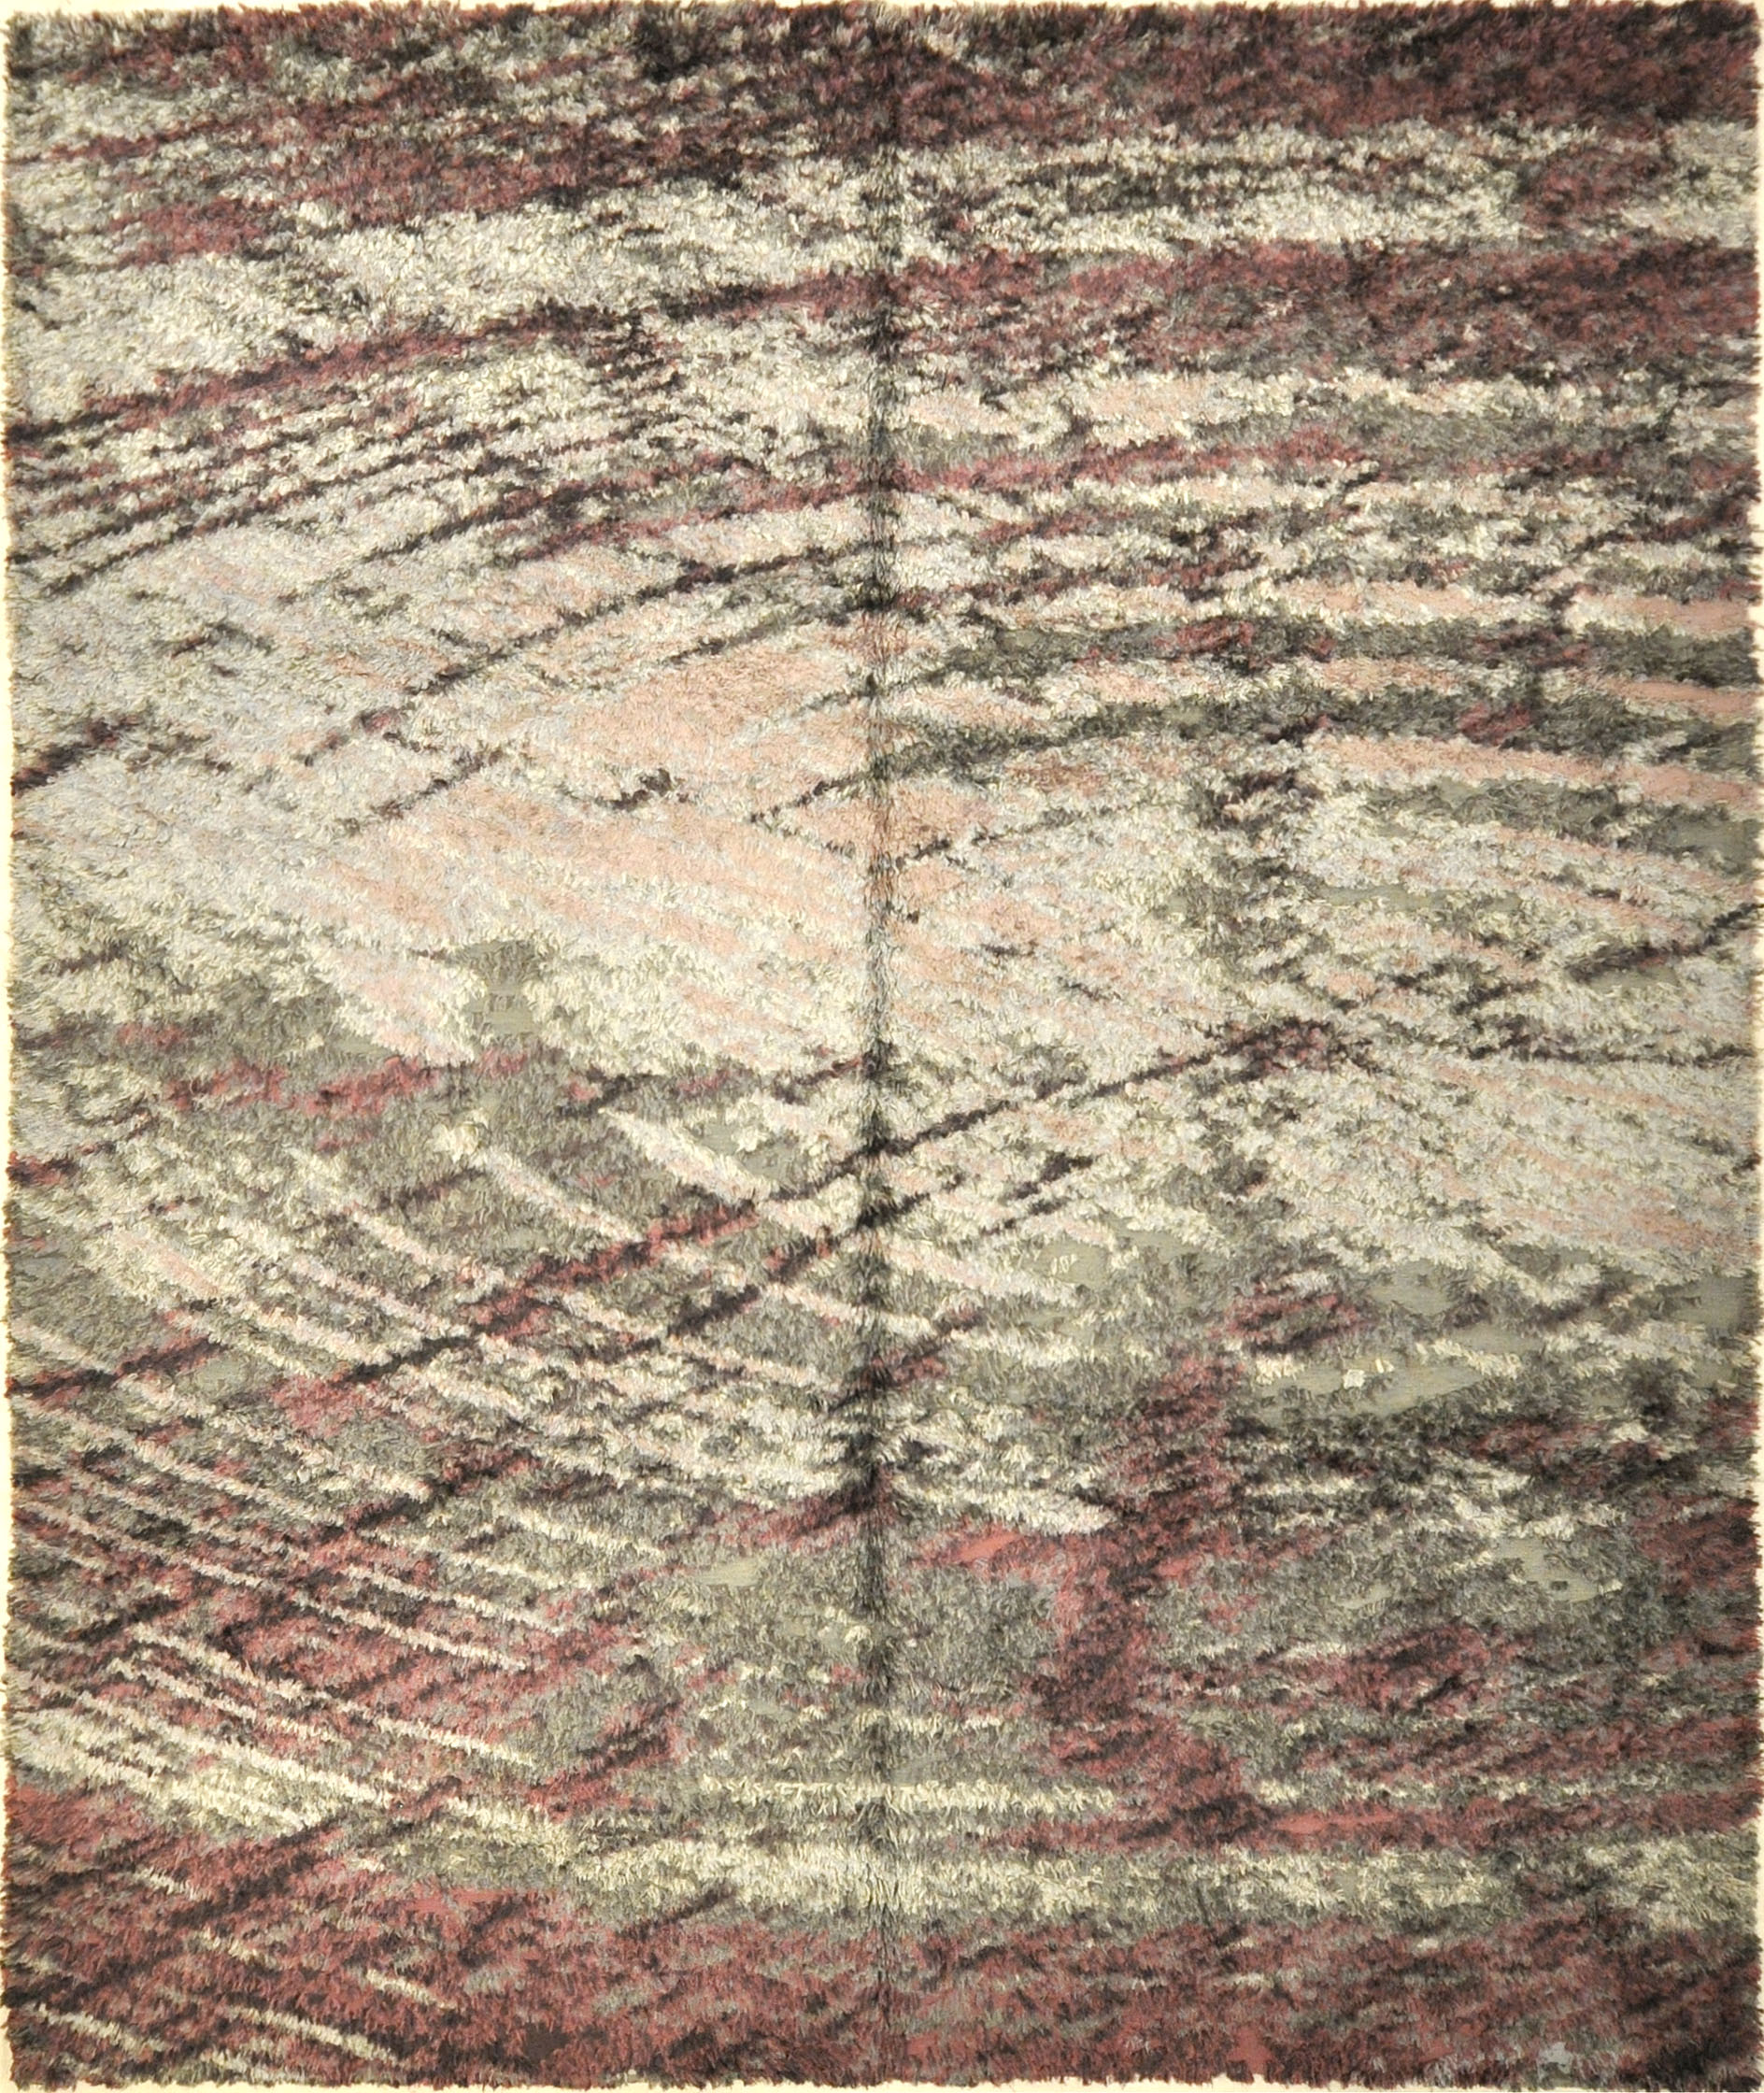 Ayka Modern Rug 30325. A piece of genuine woven carpet art sold by Santa Barbara Design Center and Rugs and More. A unique modern rug.